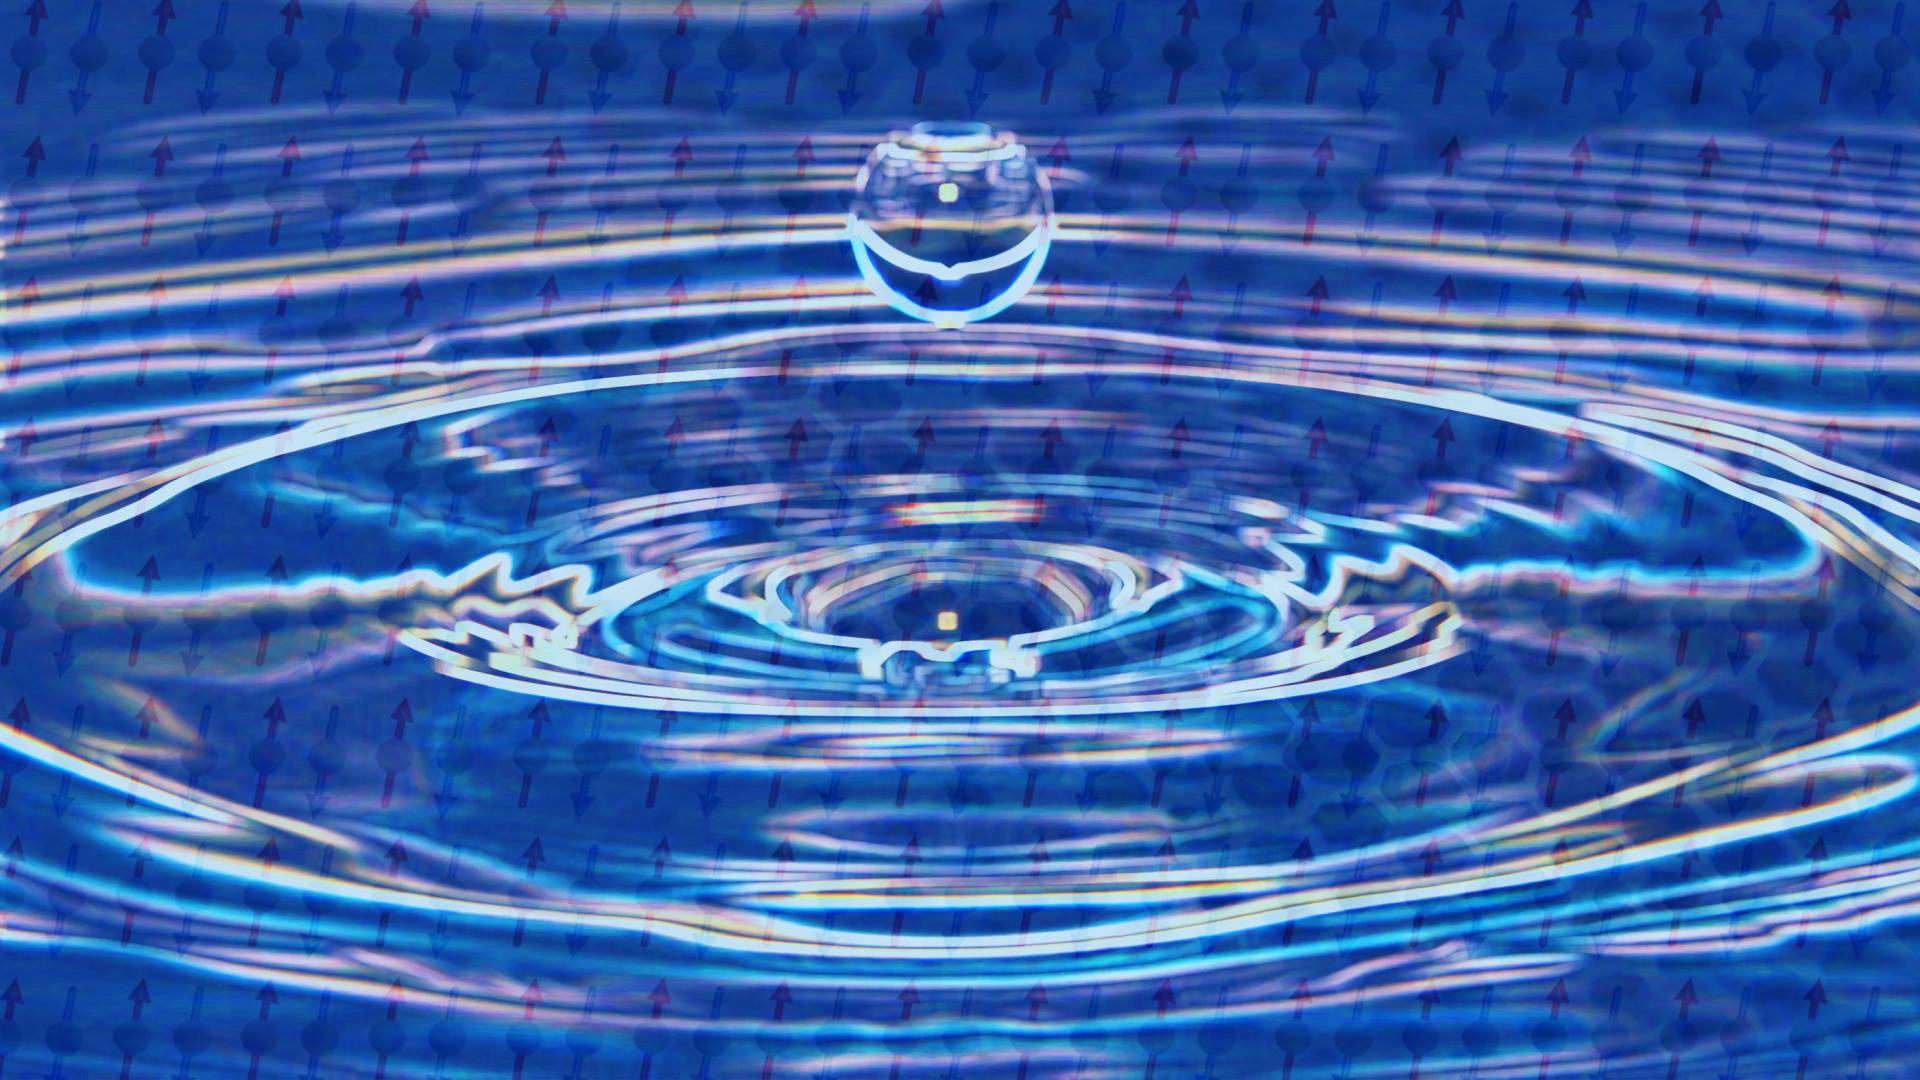 droplet suspended above ripples with electron diagram superimposed